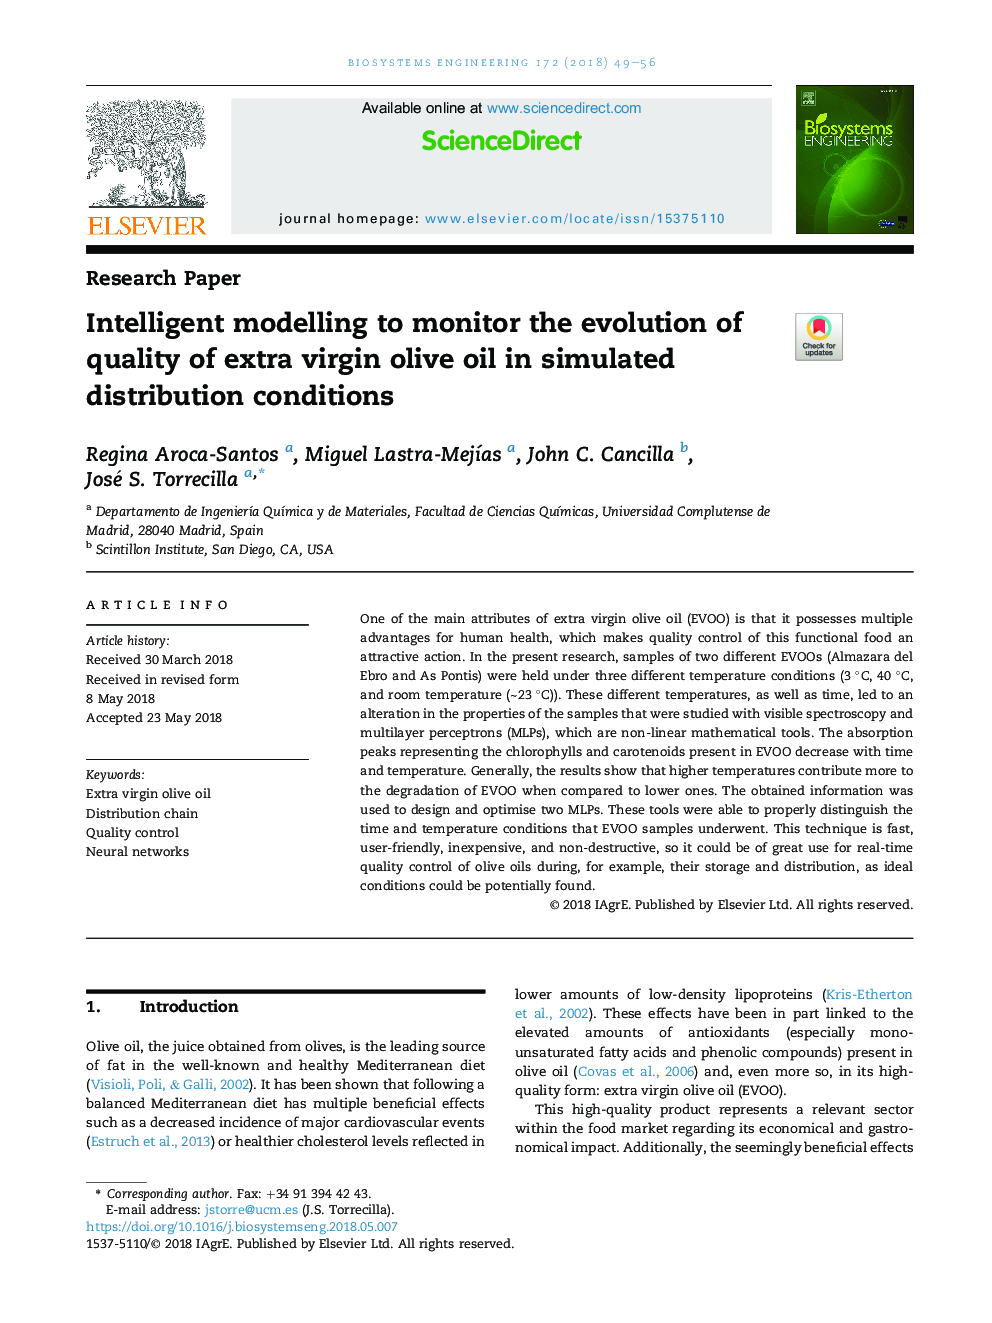 Intelligent modelling to monitor the evolution of quality of extra virgin olive oil in simulated distribution conditions